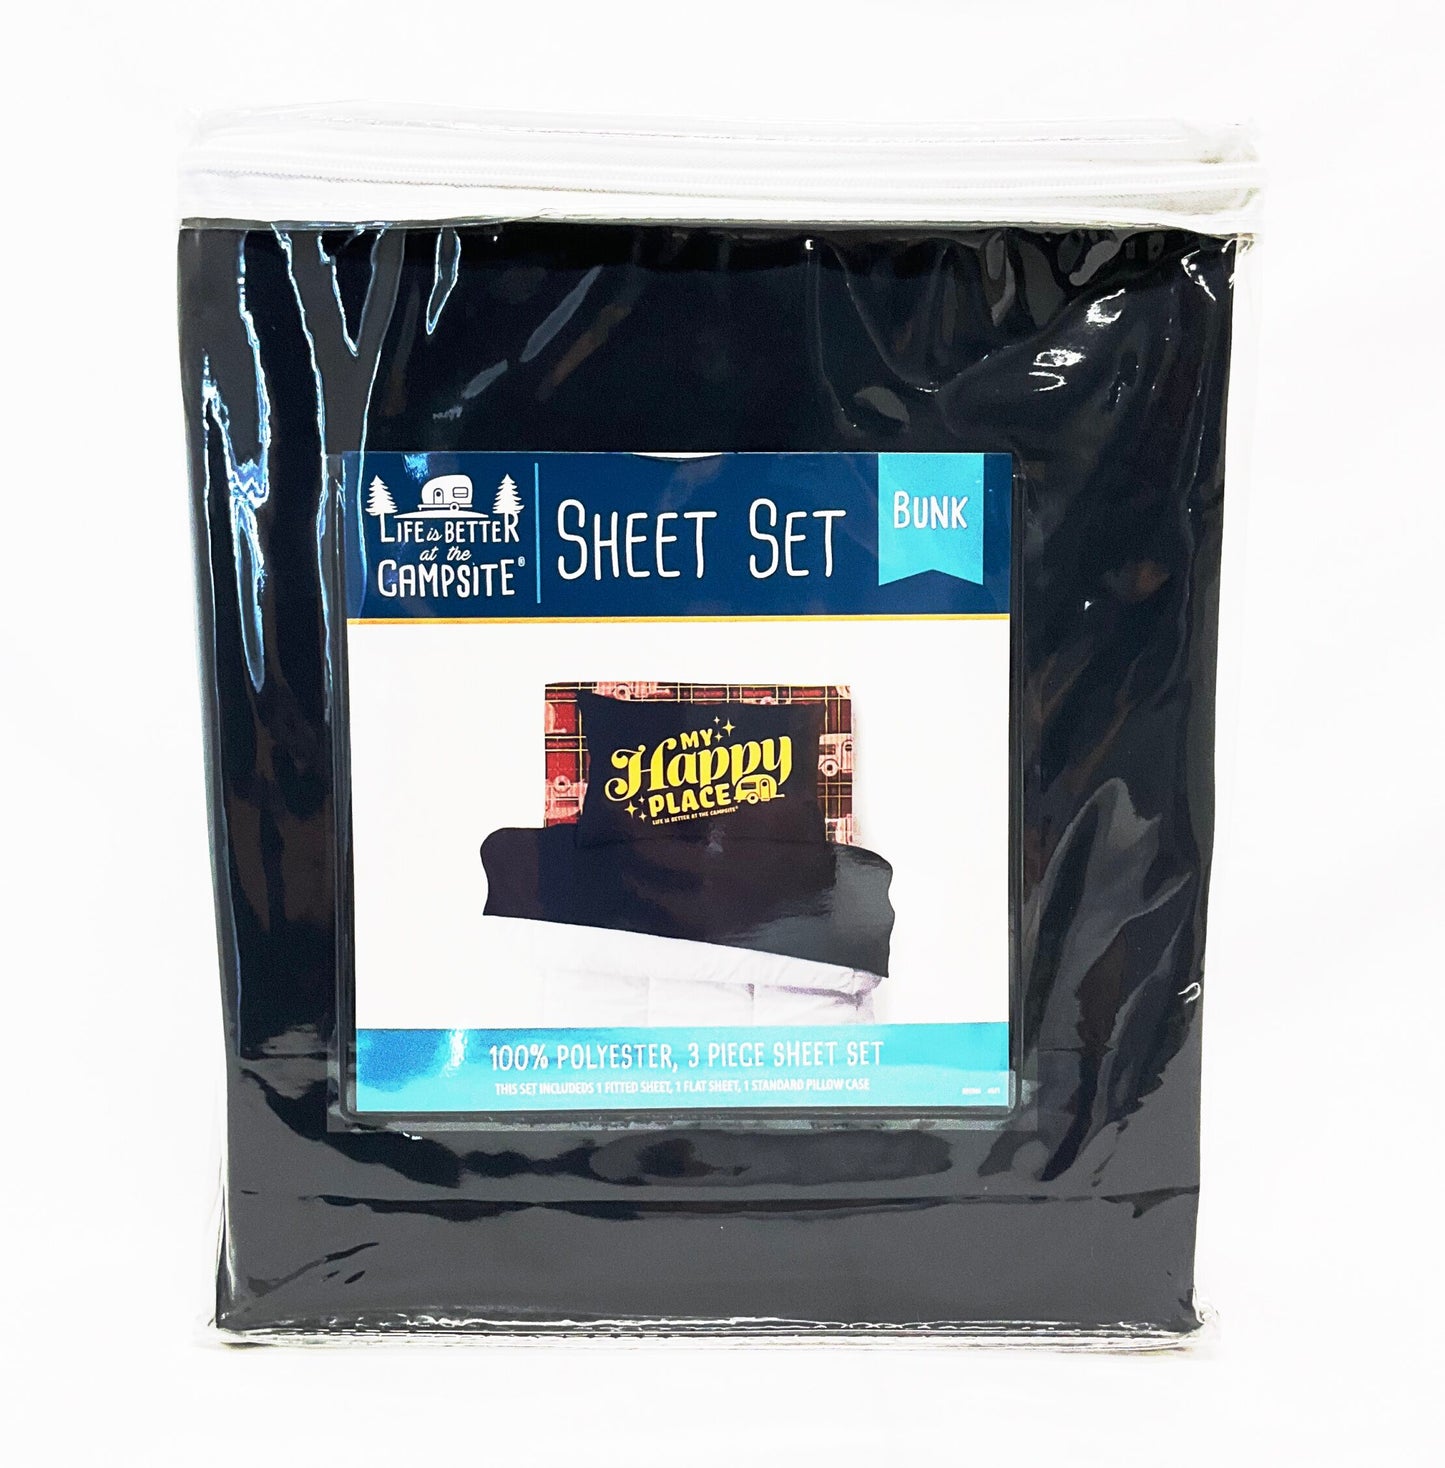 3 Piece Sheet Set - Life Is Better At The Campsite